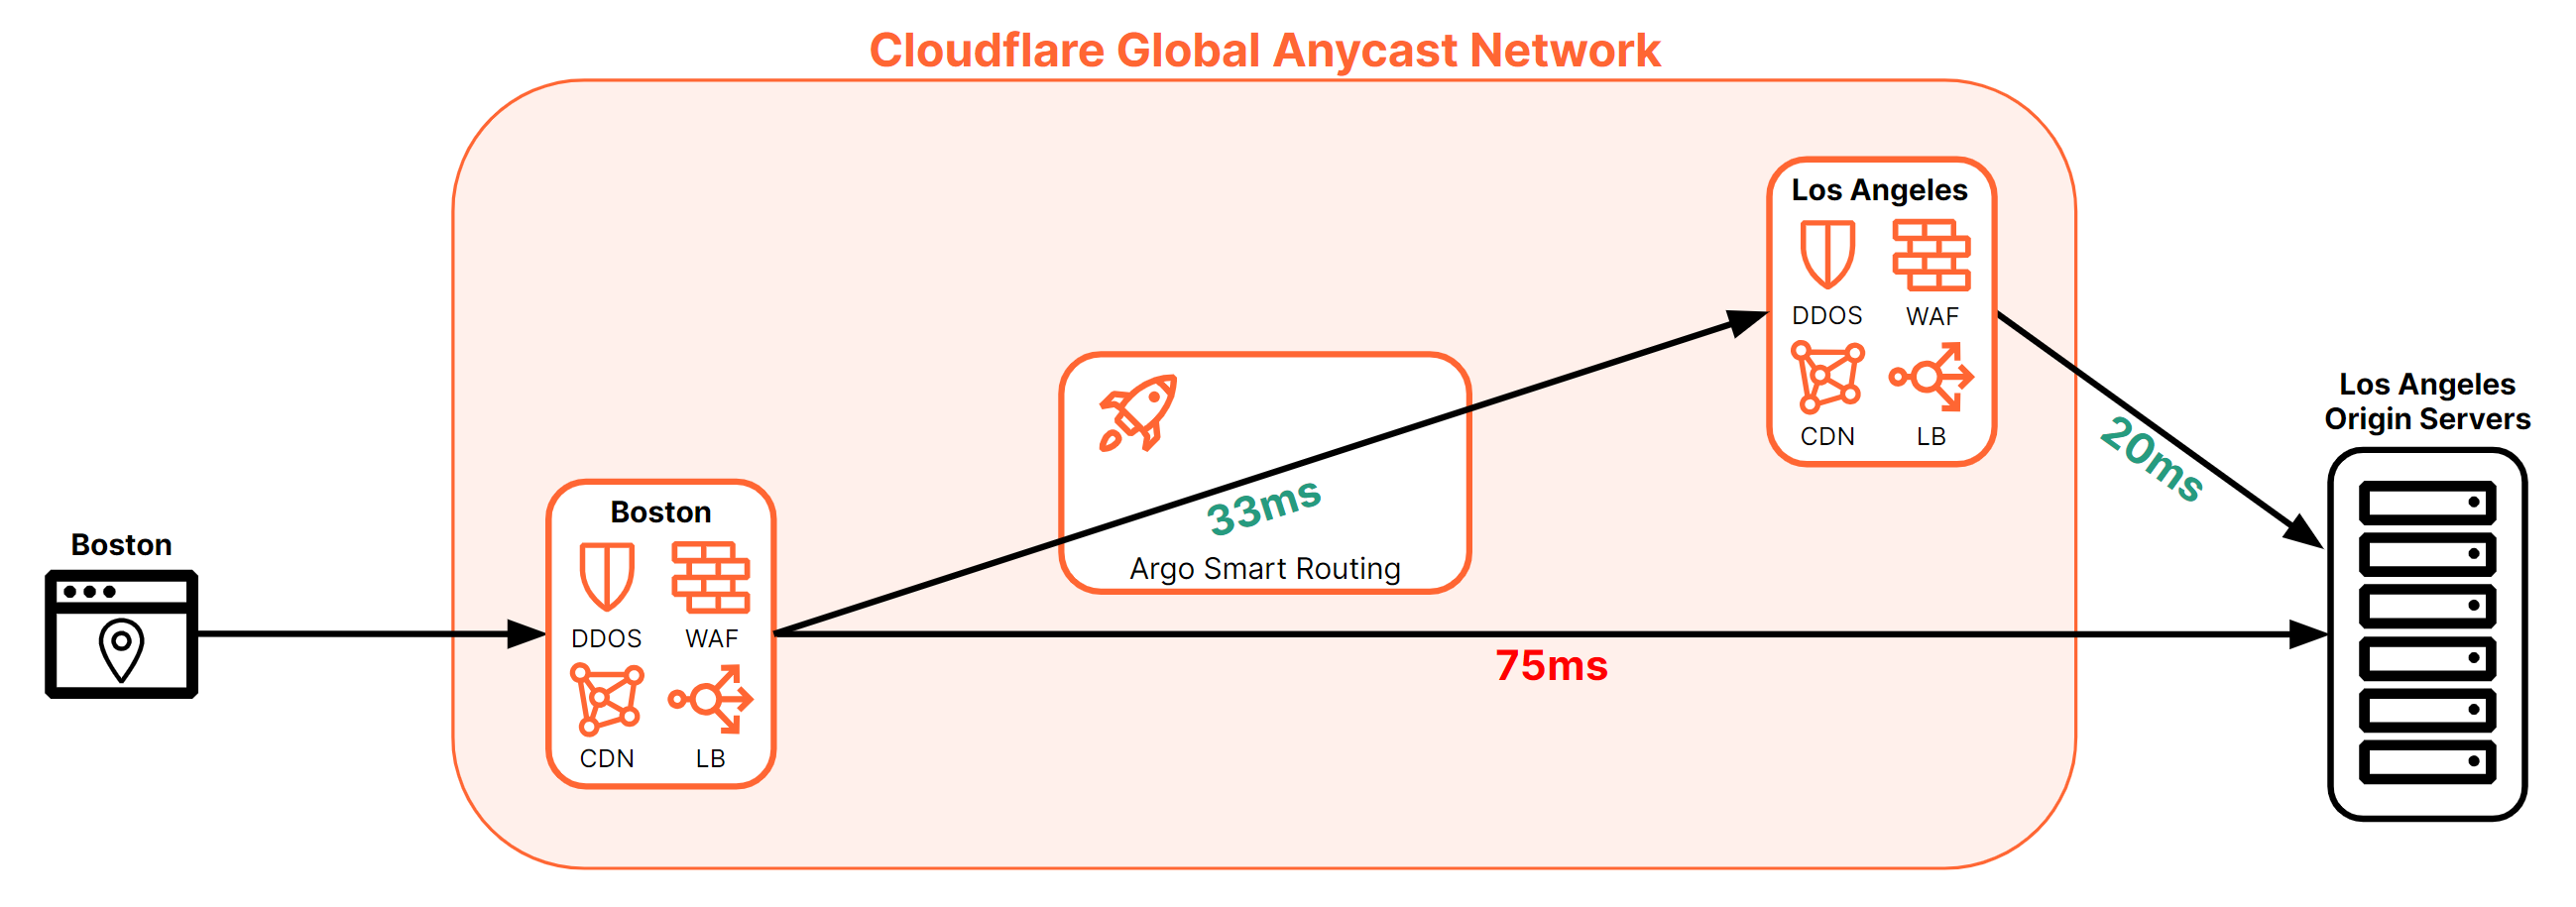 Argo Smart Routing finds the fastest path between requester and origin